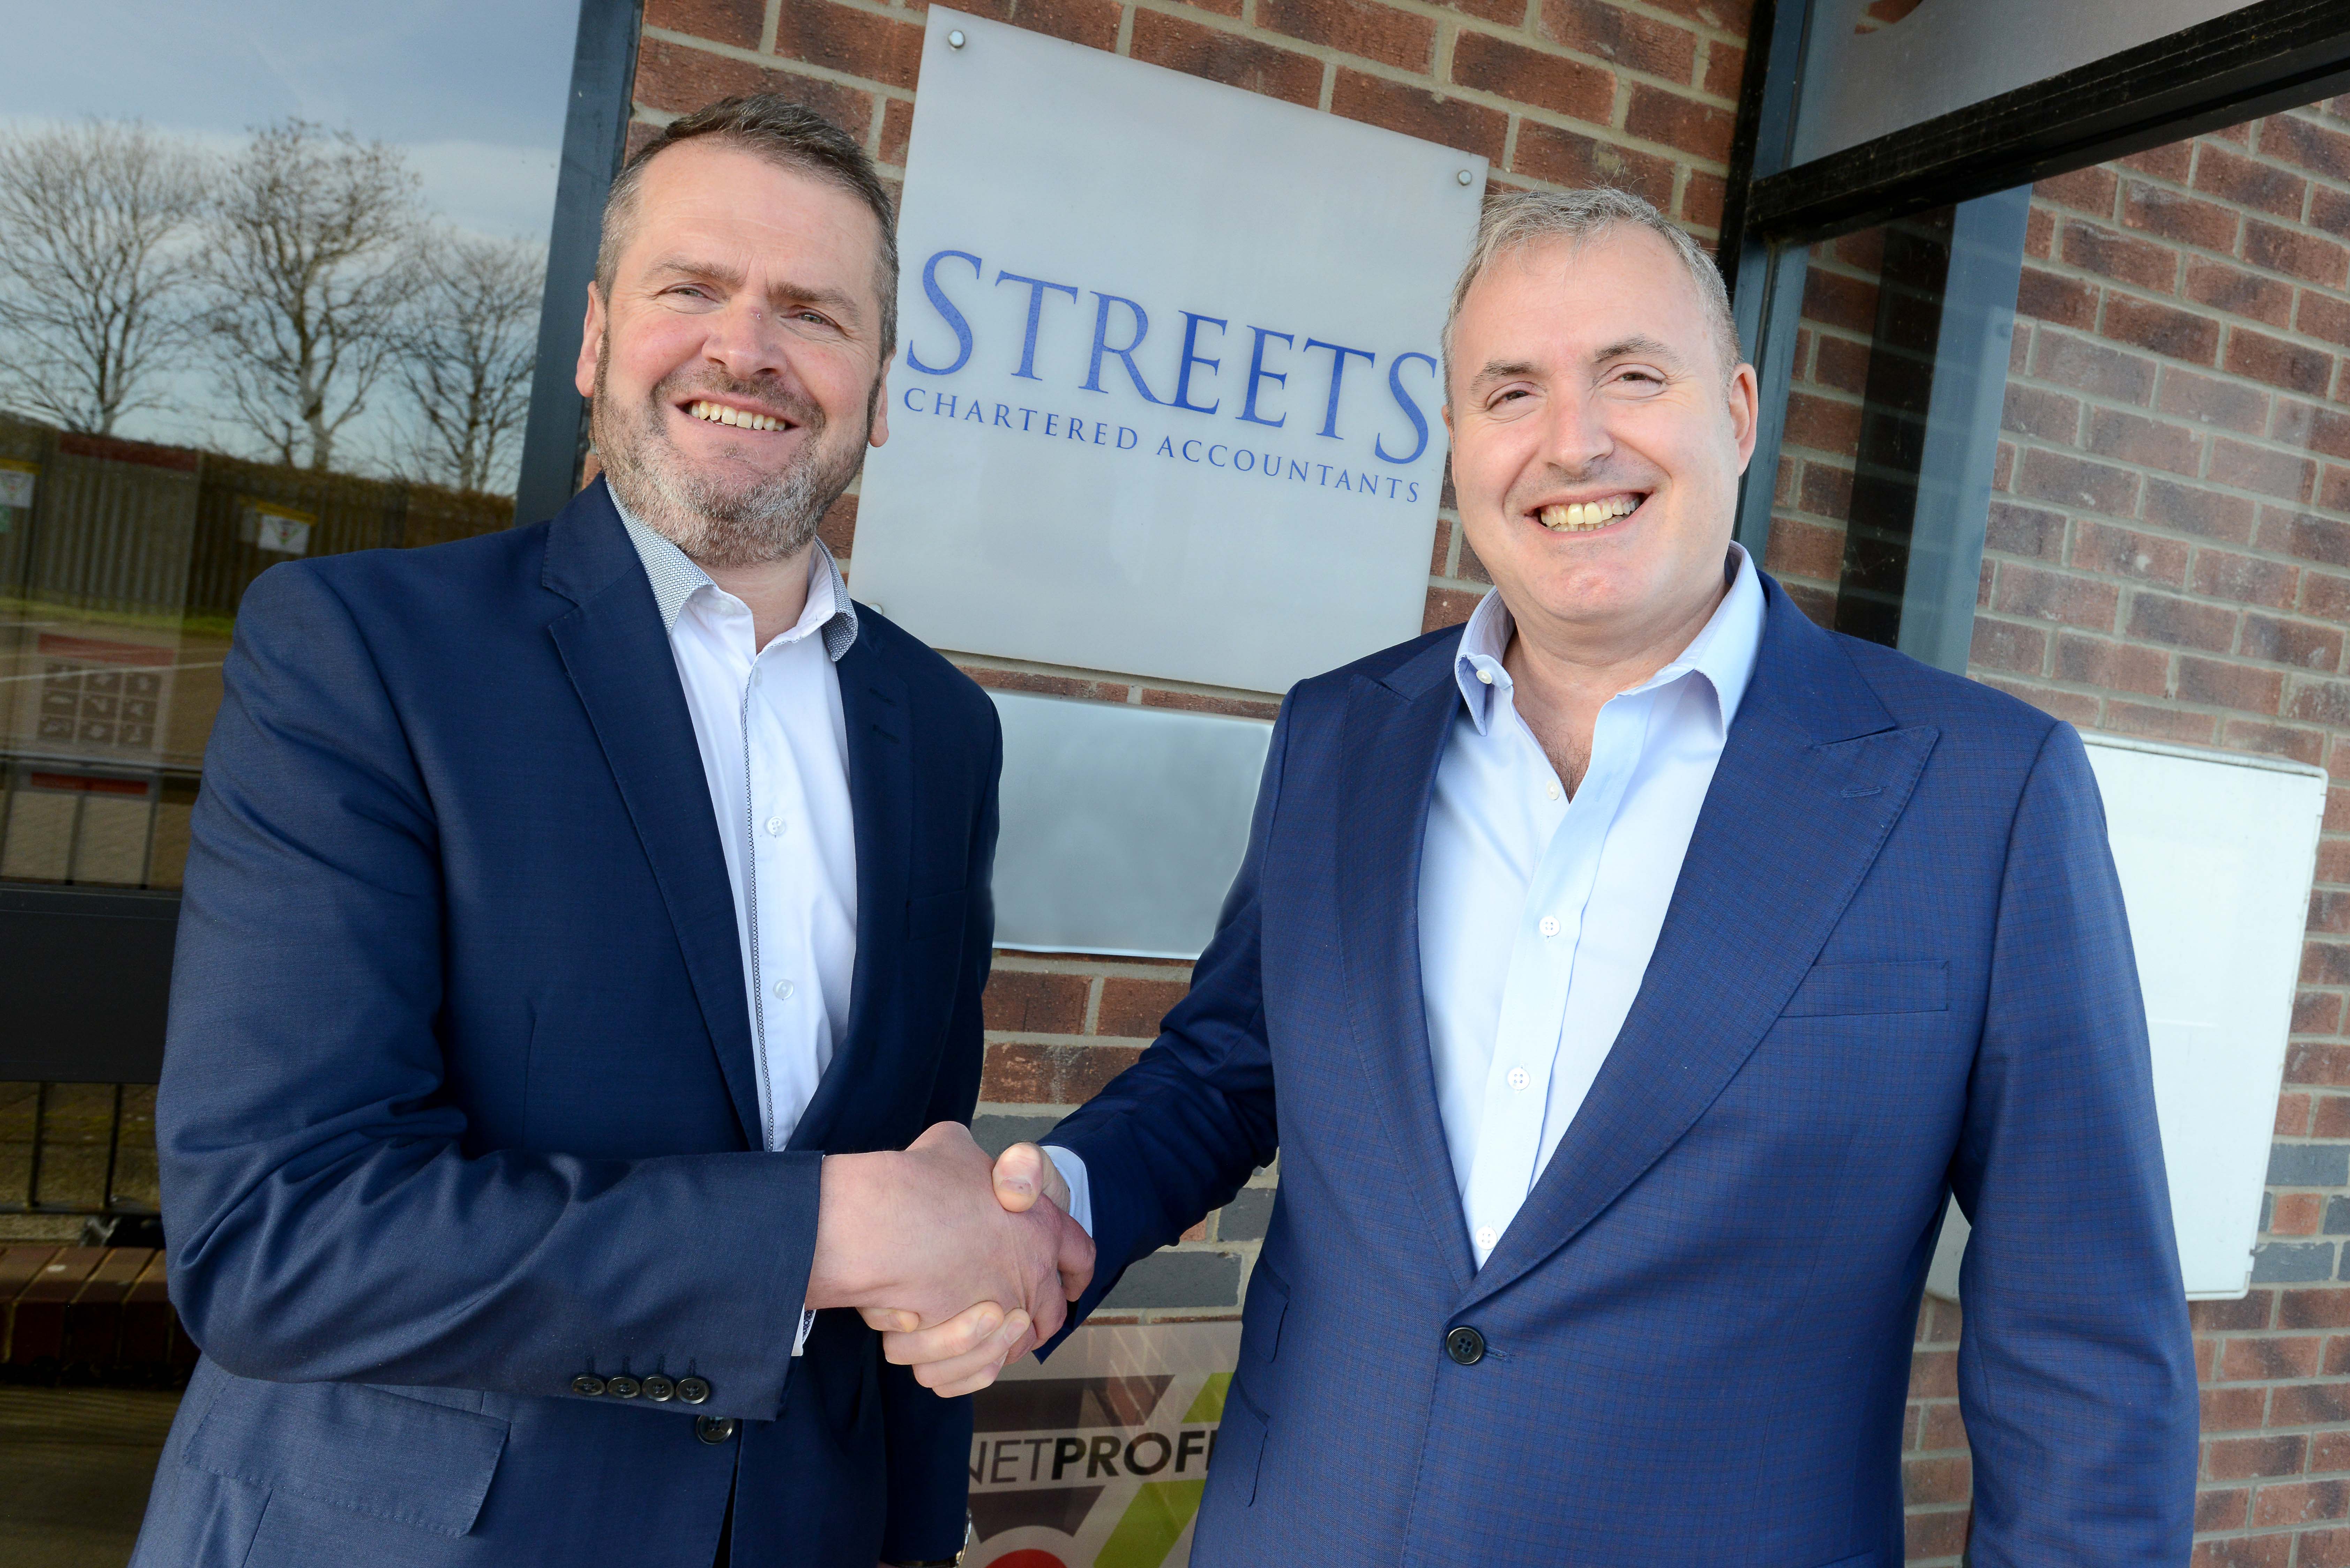 Streets Chartered Accountants appoint Martyn Shakespear as Head of Banking & Finance